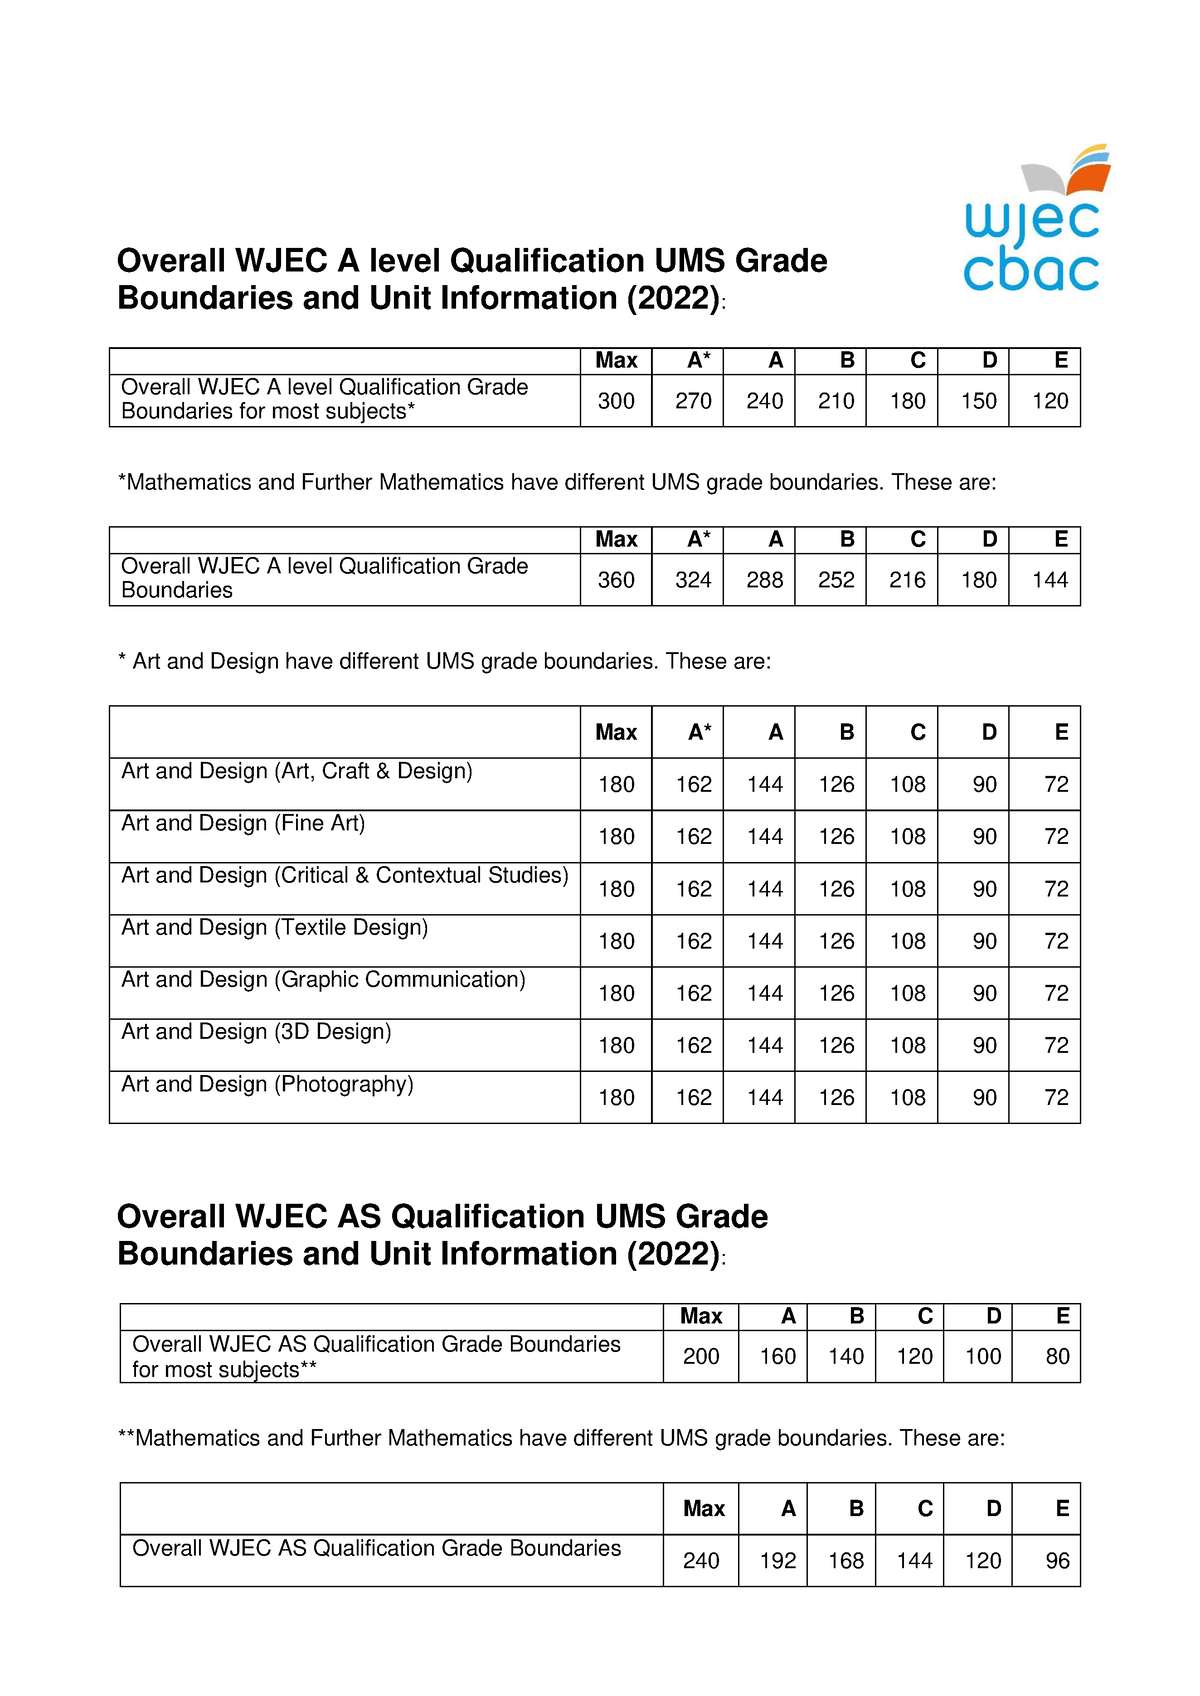 Overall a as wjec ums grade boundaries and unit information summer 2022